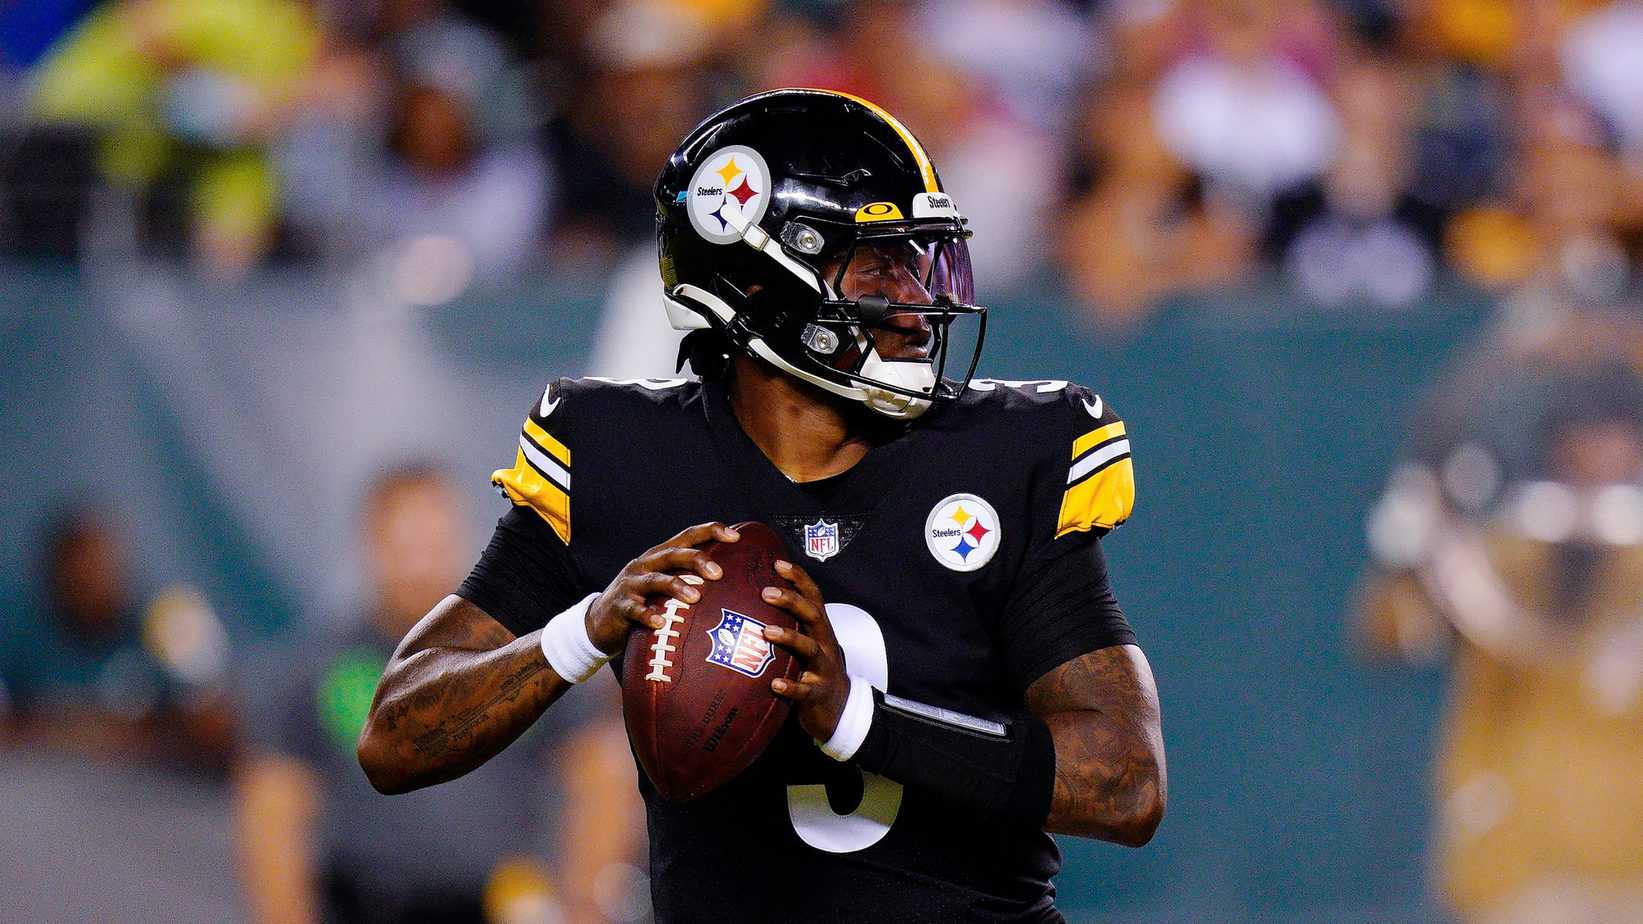 After Dwayne Haskins' successful first game as a member of the Pittsburgh Steelers, the question now becomes: Will he be Ben Roethlisberger's replacement?